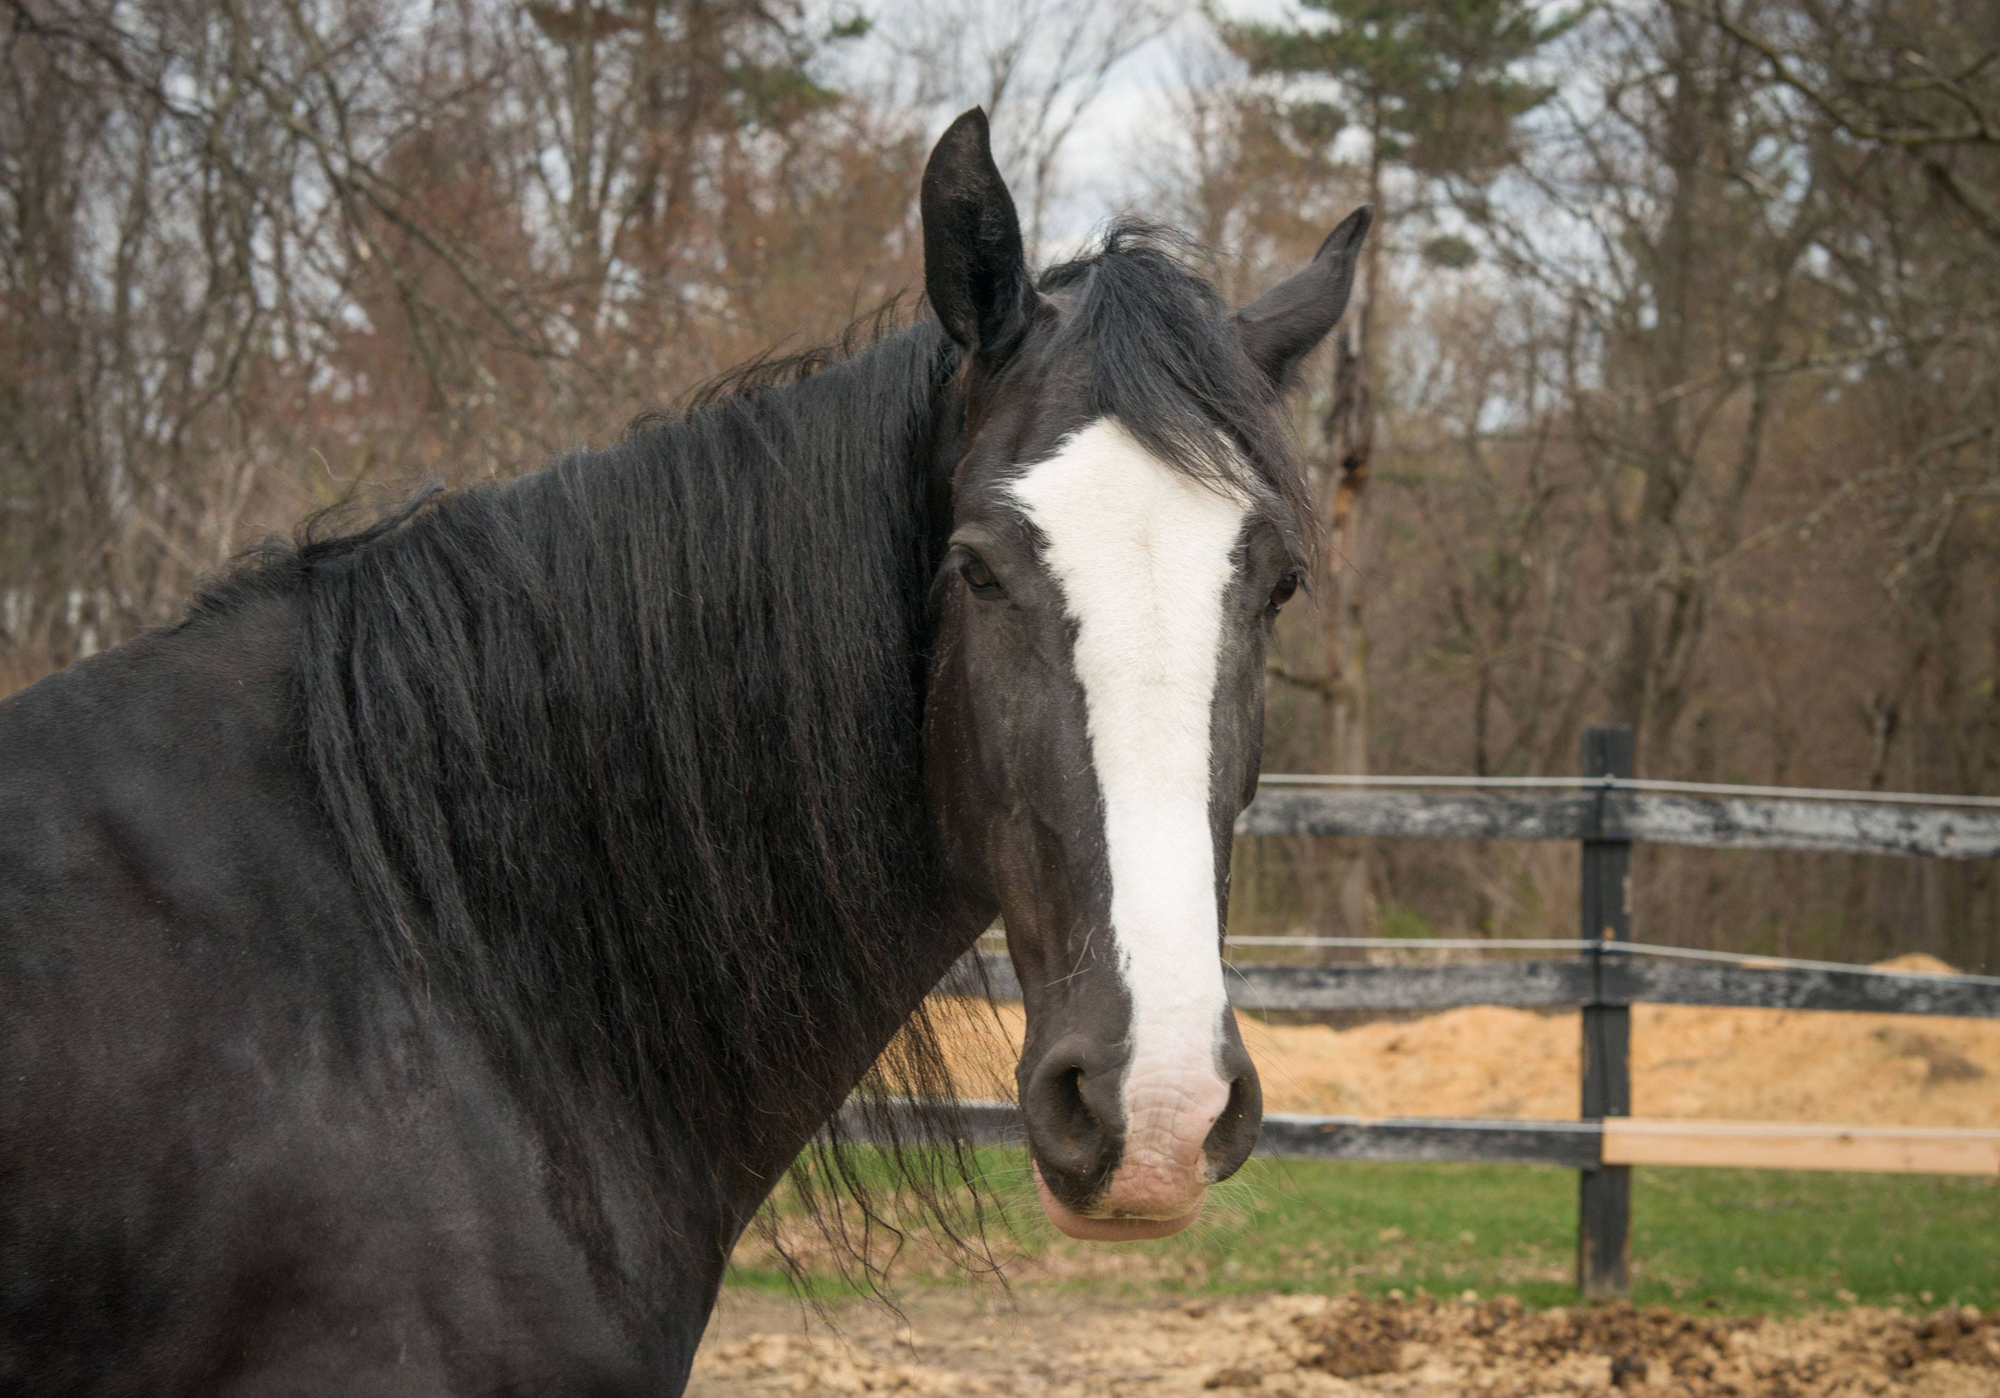 A black and white horse